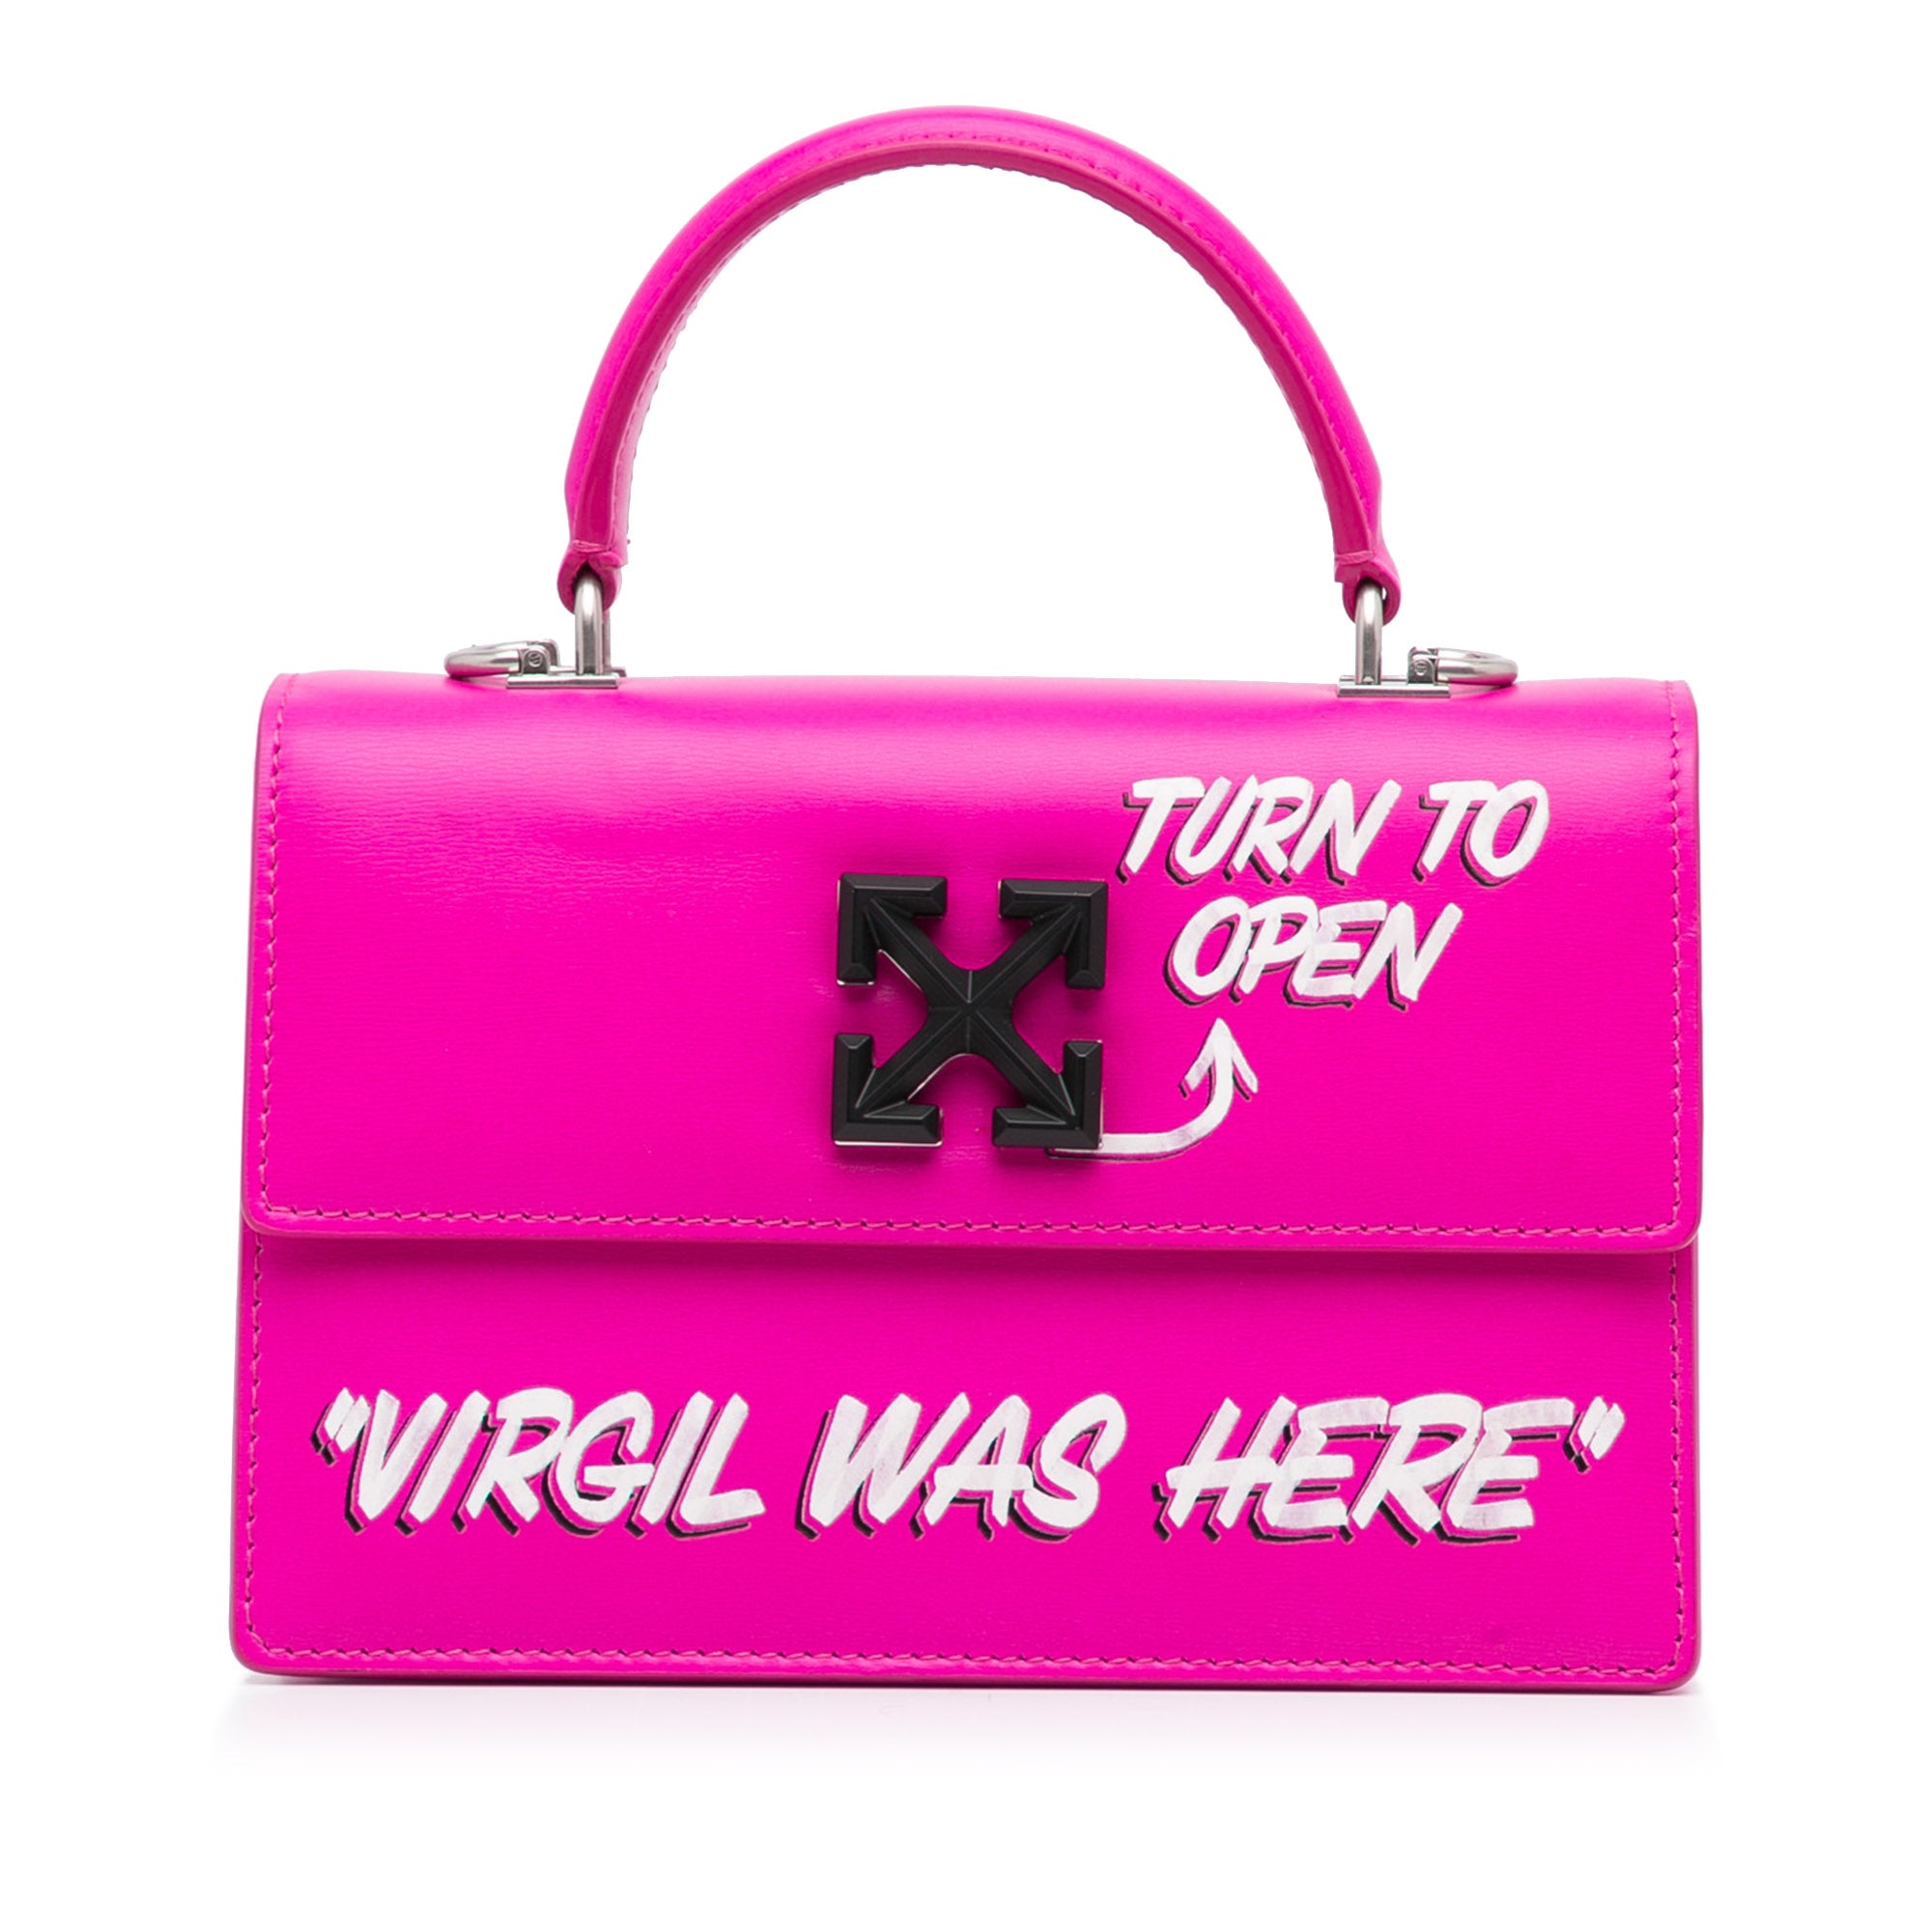 Virgil abloh LOUIS Vuitton % authentic with tags for Sale in The